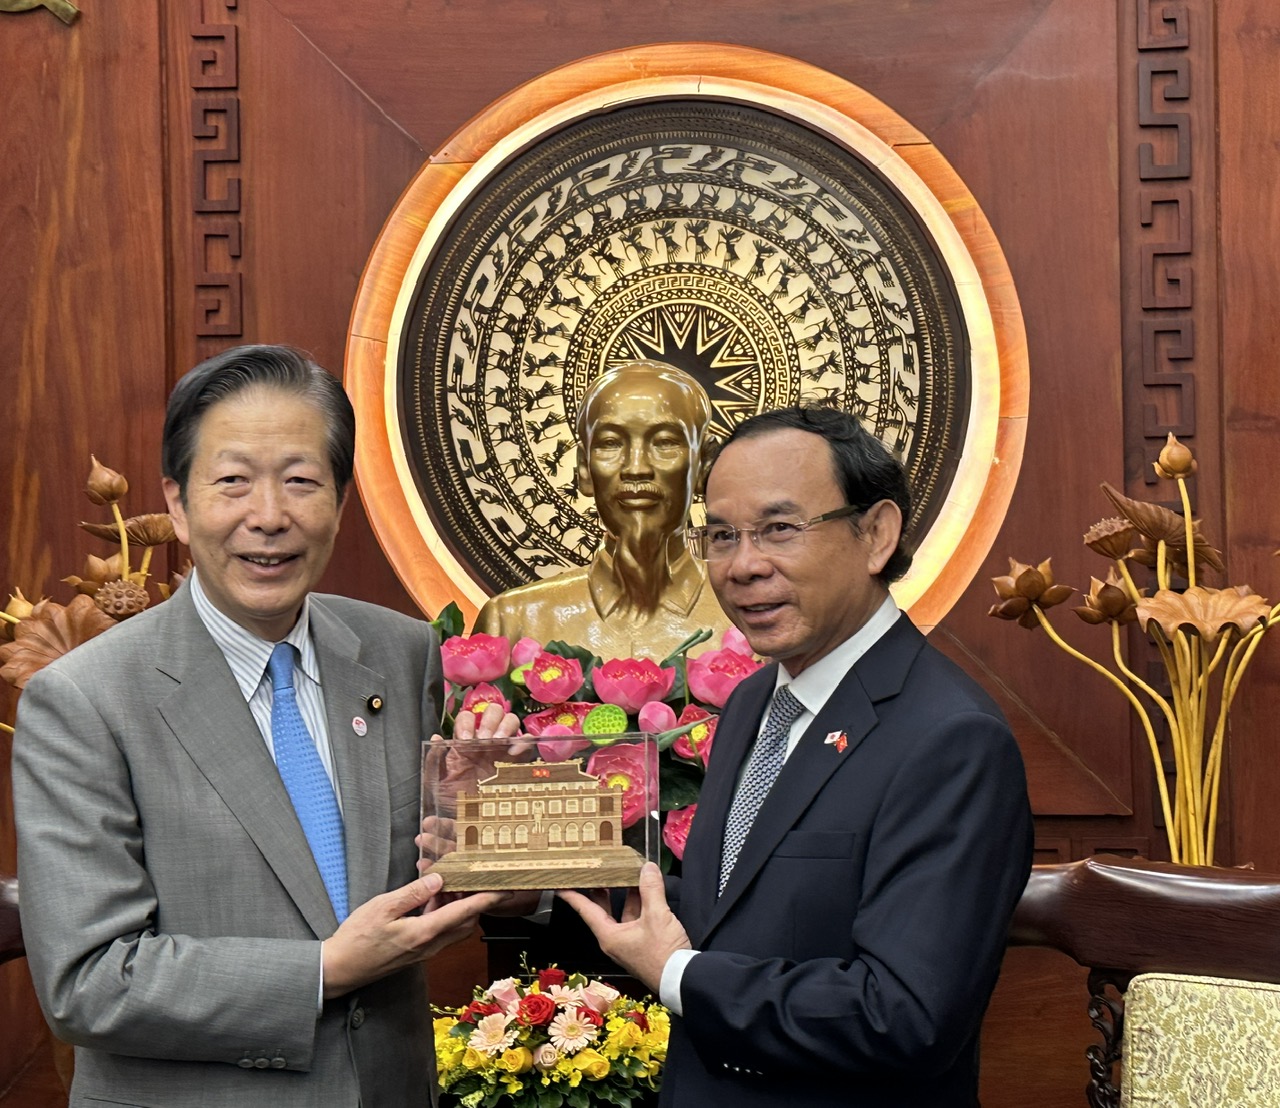 President of the Japanese Justice Party: Ho Chi Minh City has developed a lot - photo 2.